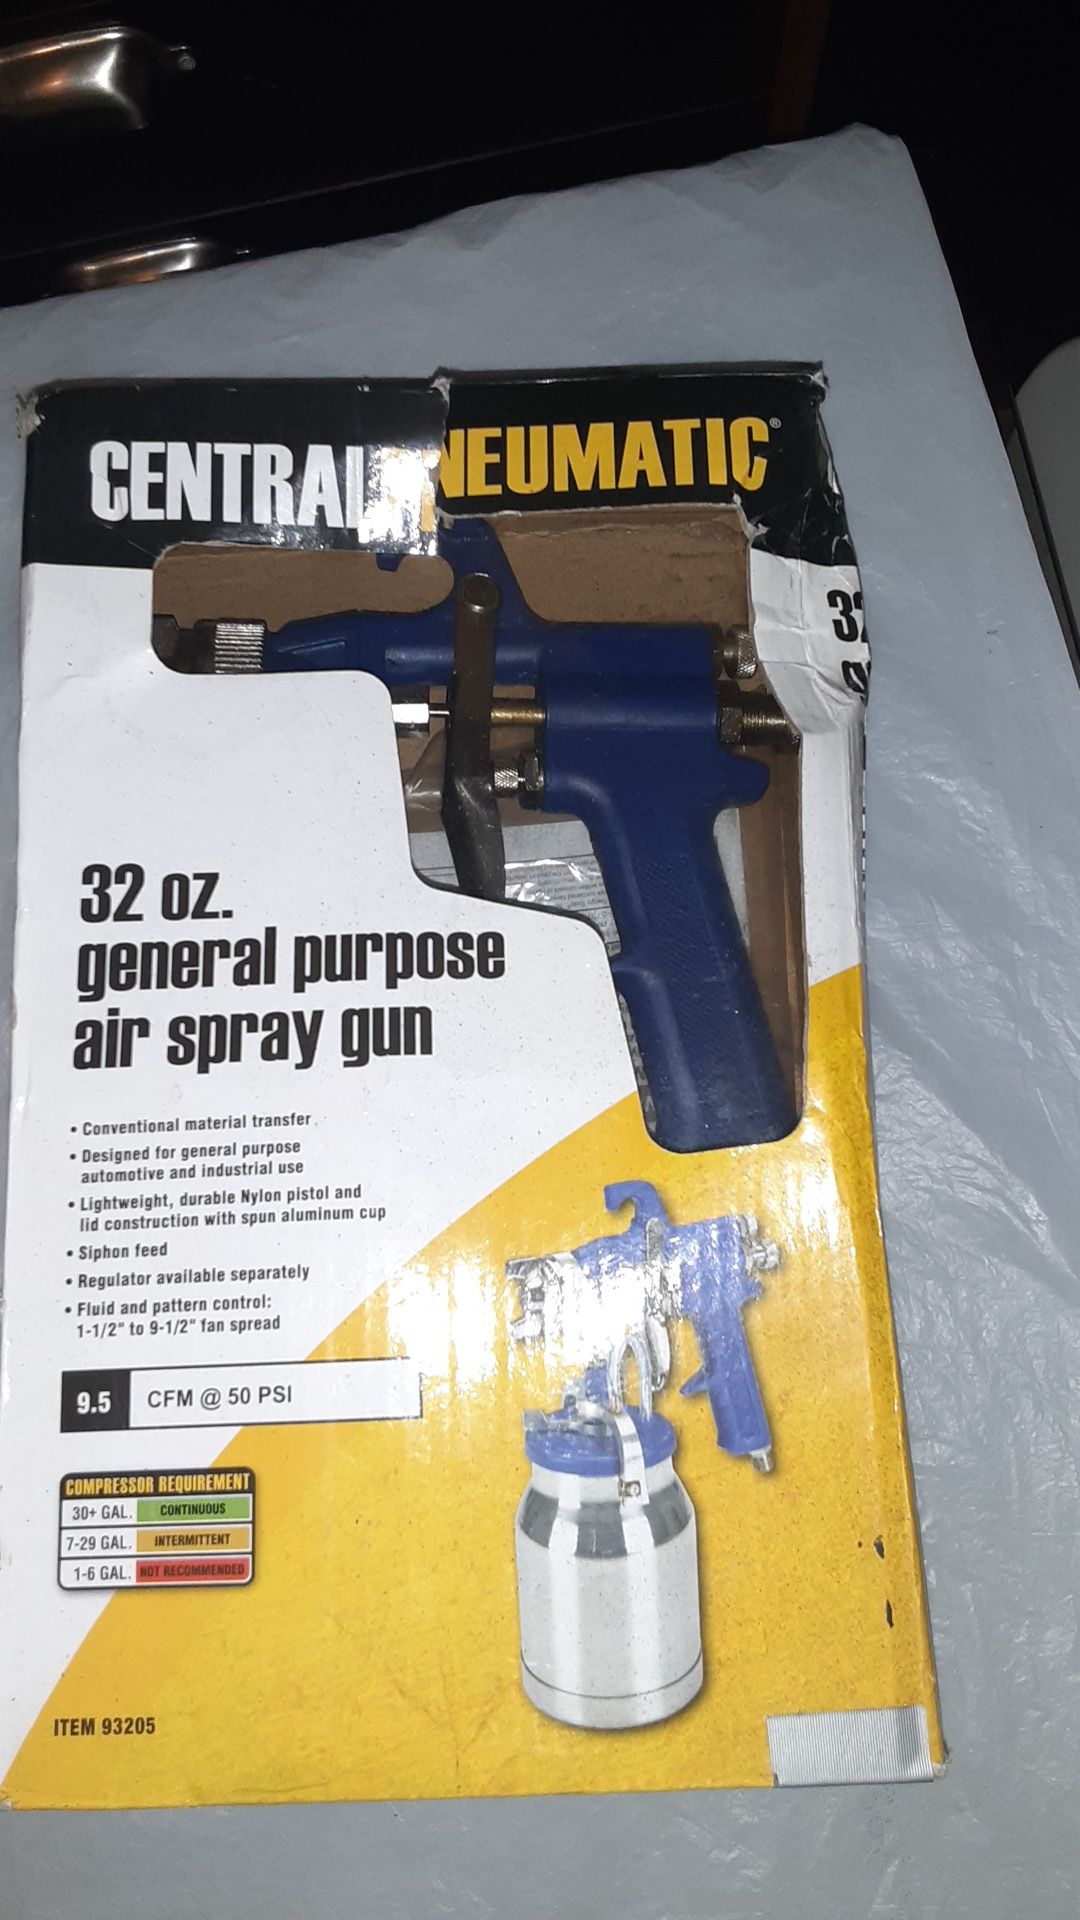 Central pneumatic General all-purpose paint sprayer